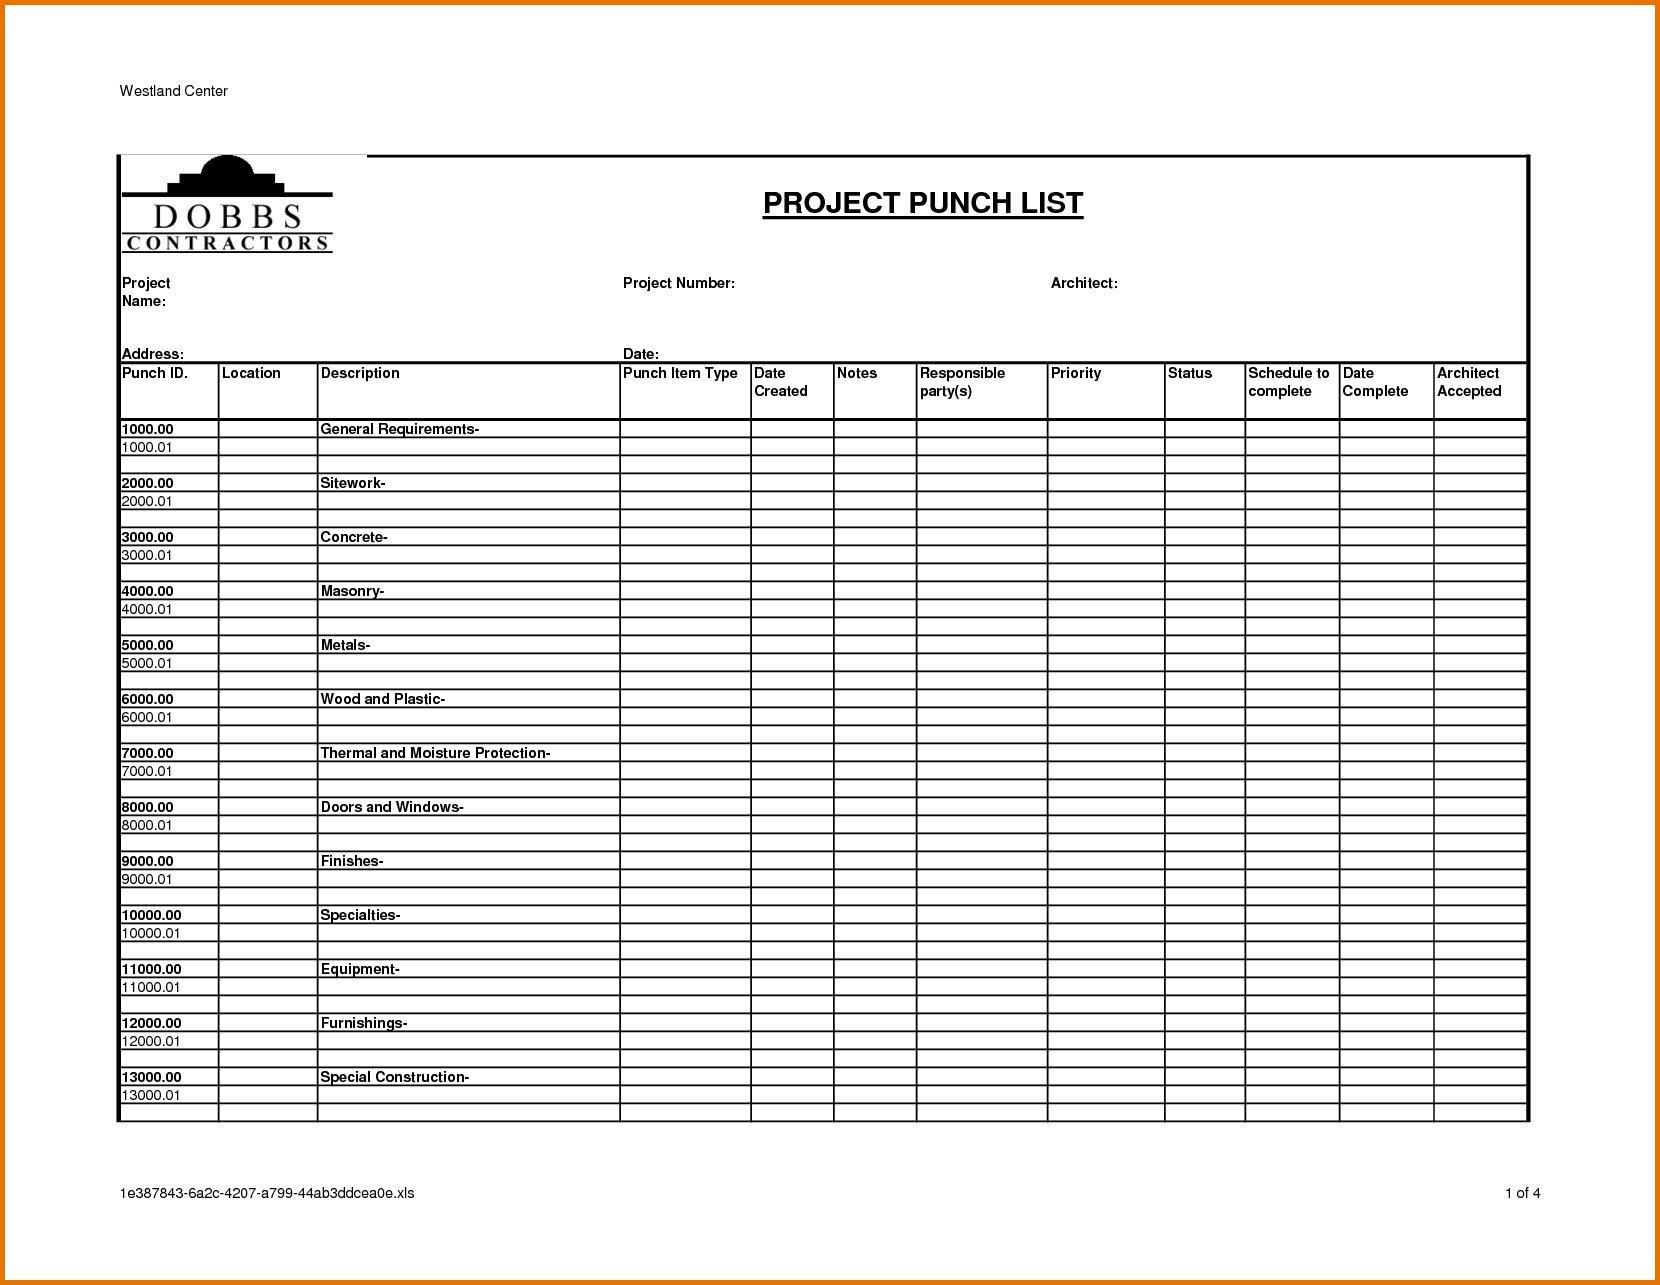 Punch List Template Excel Punch List Template